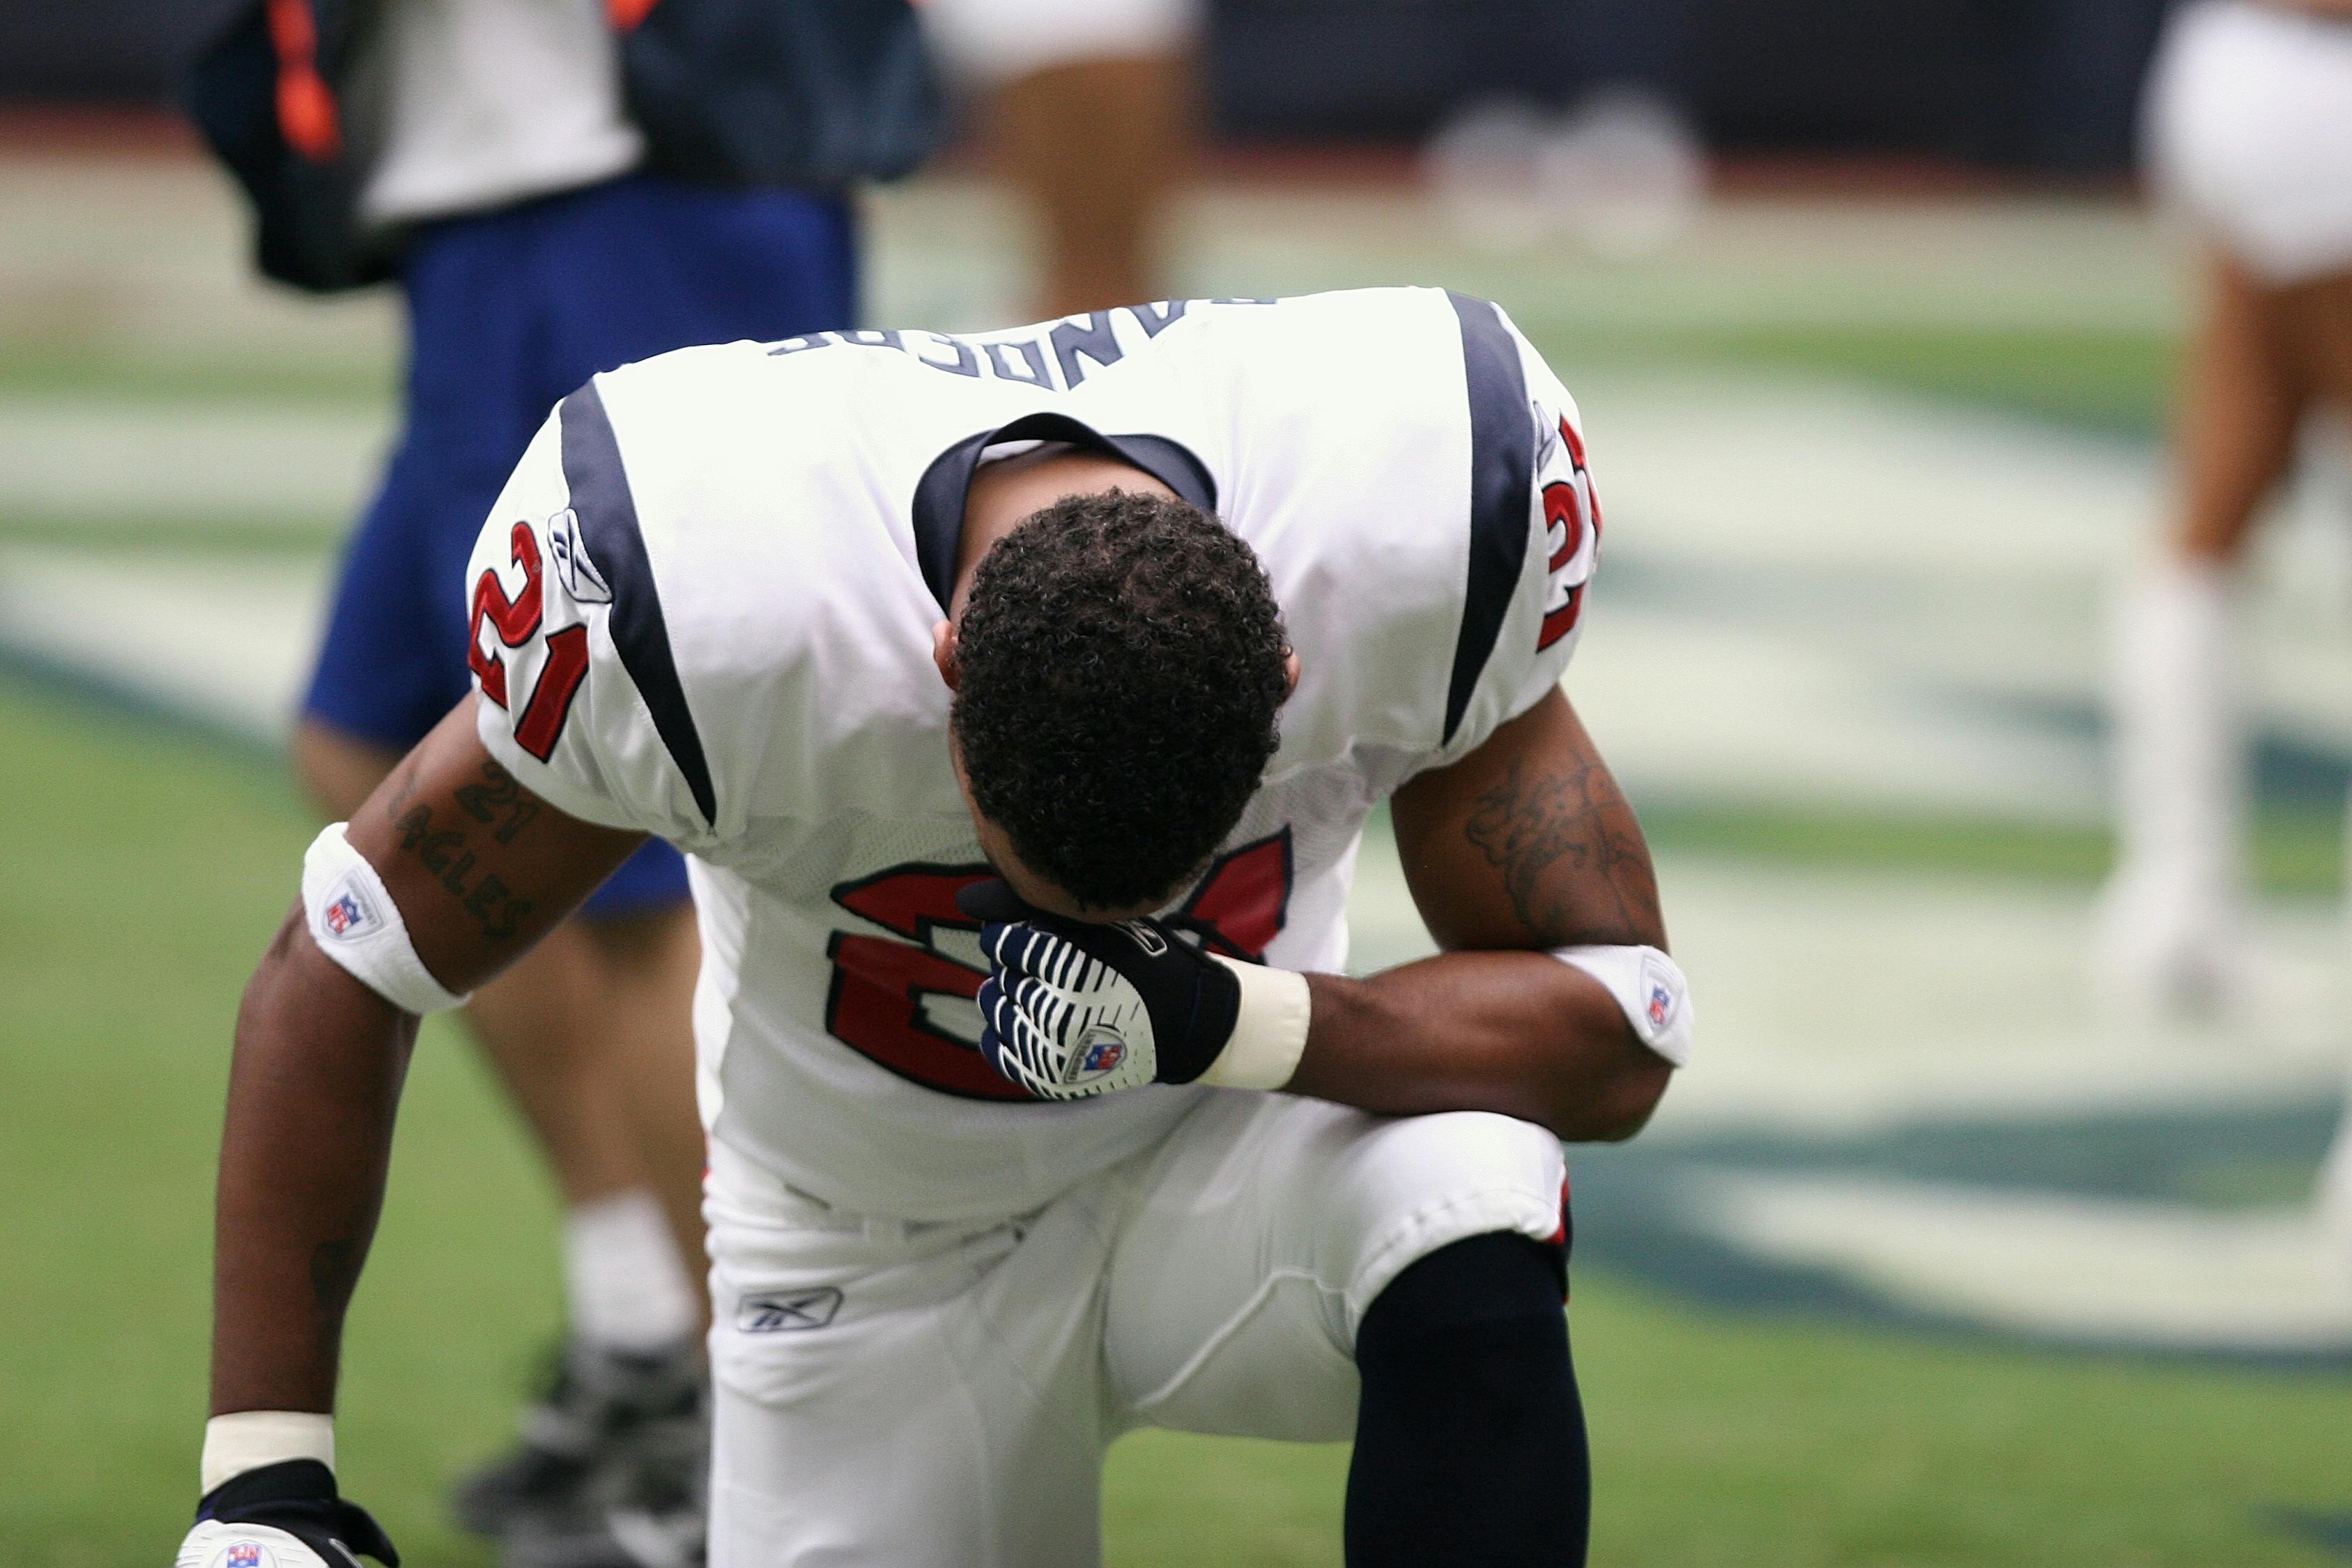 Football Player on Bended Knees · Free Stock Photo